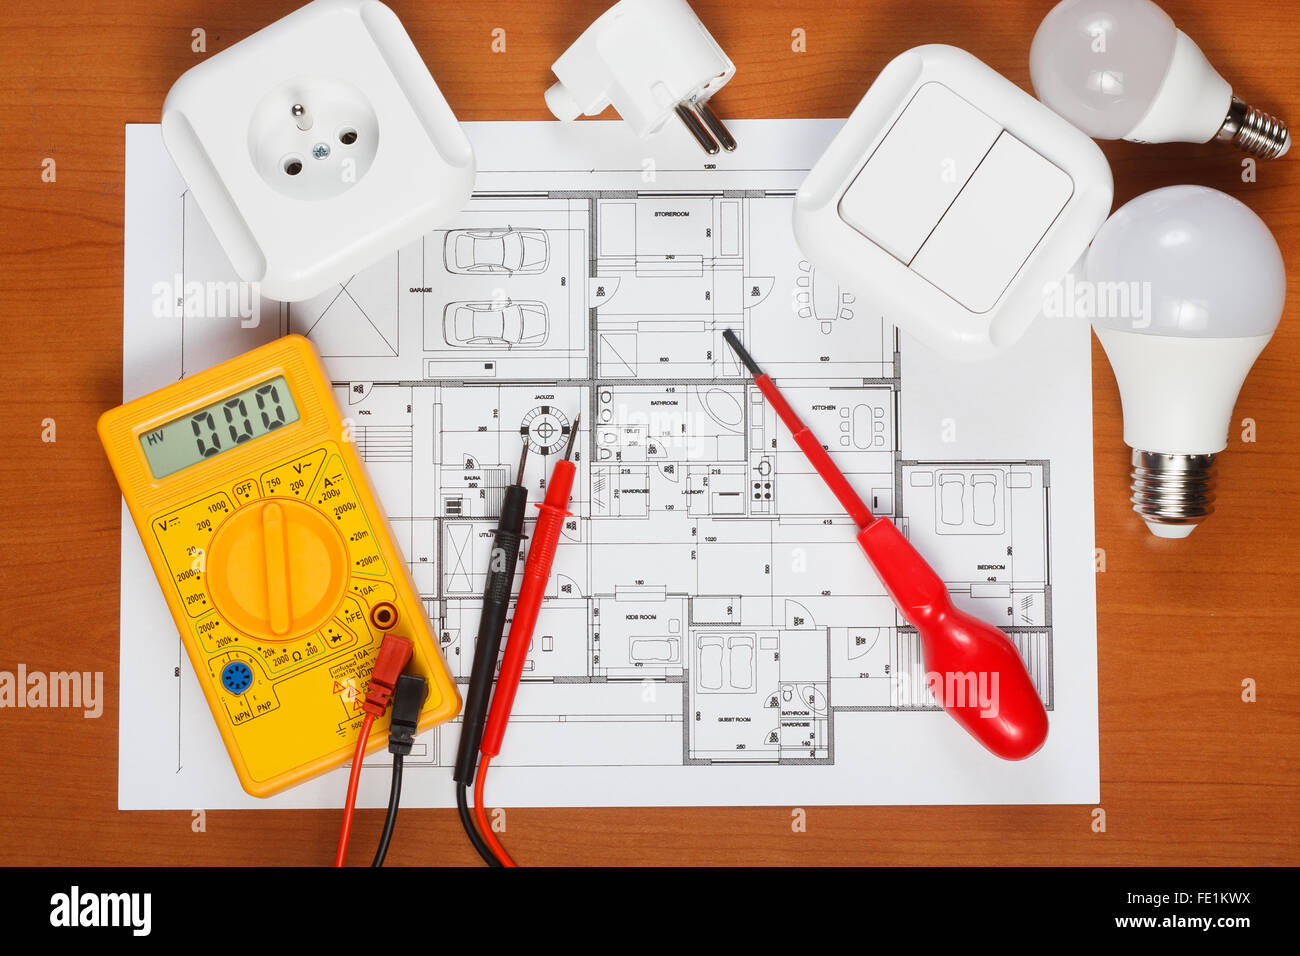 Electrical equipment, tools and house plans on the desk Stock Photo